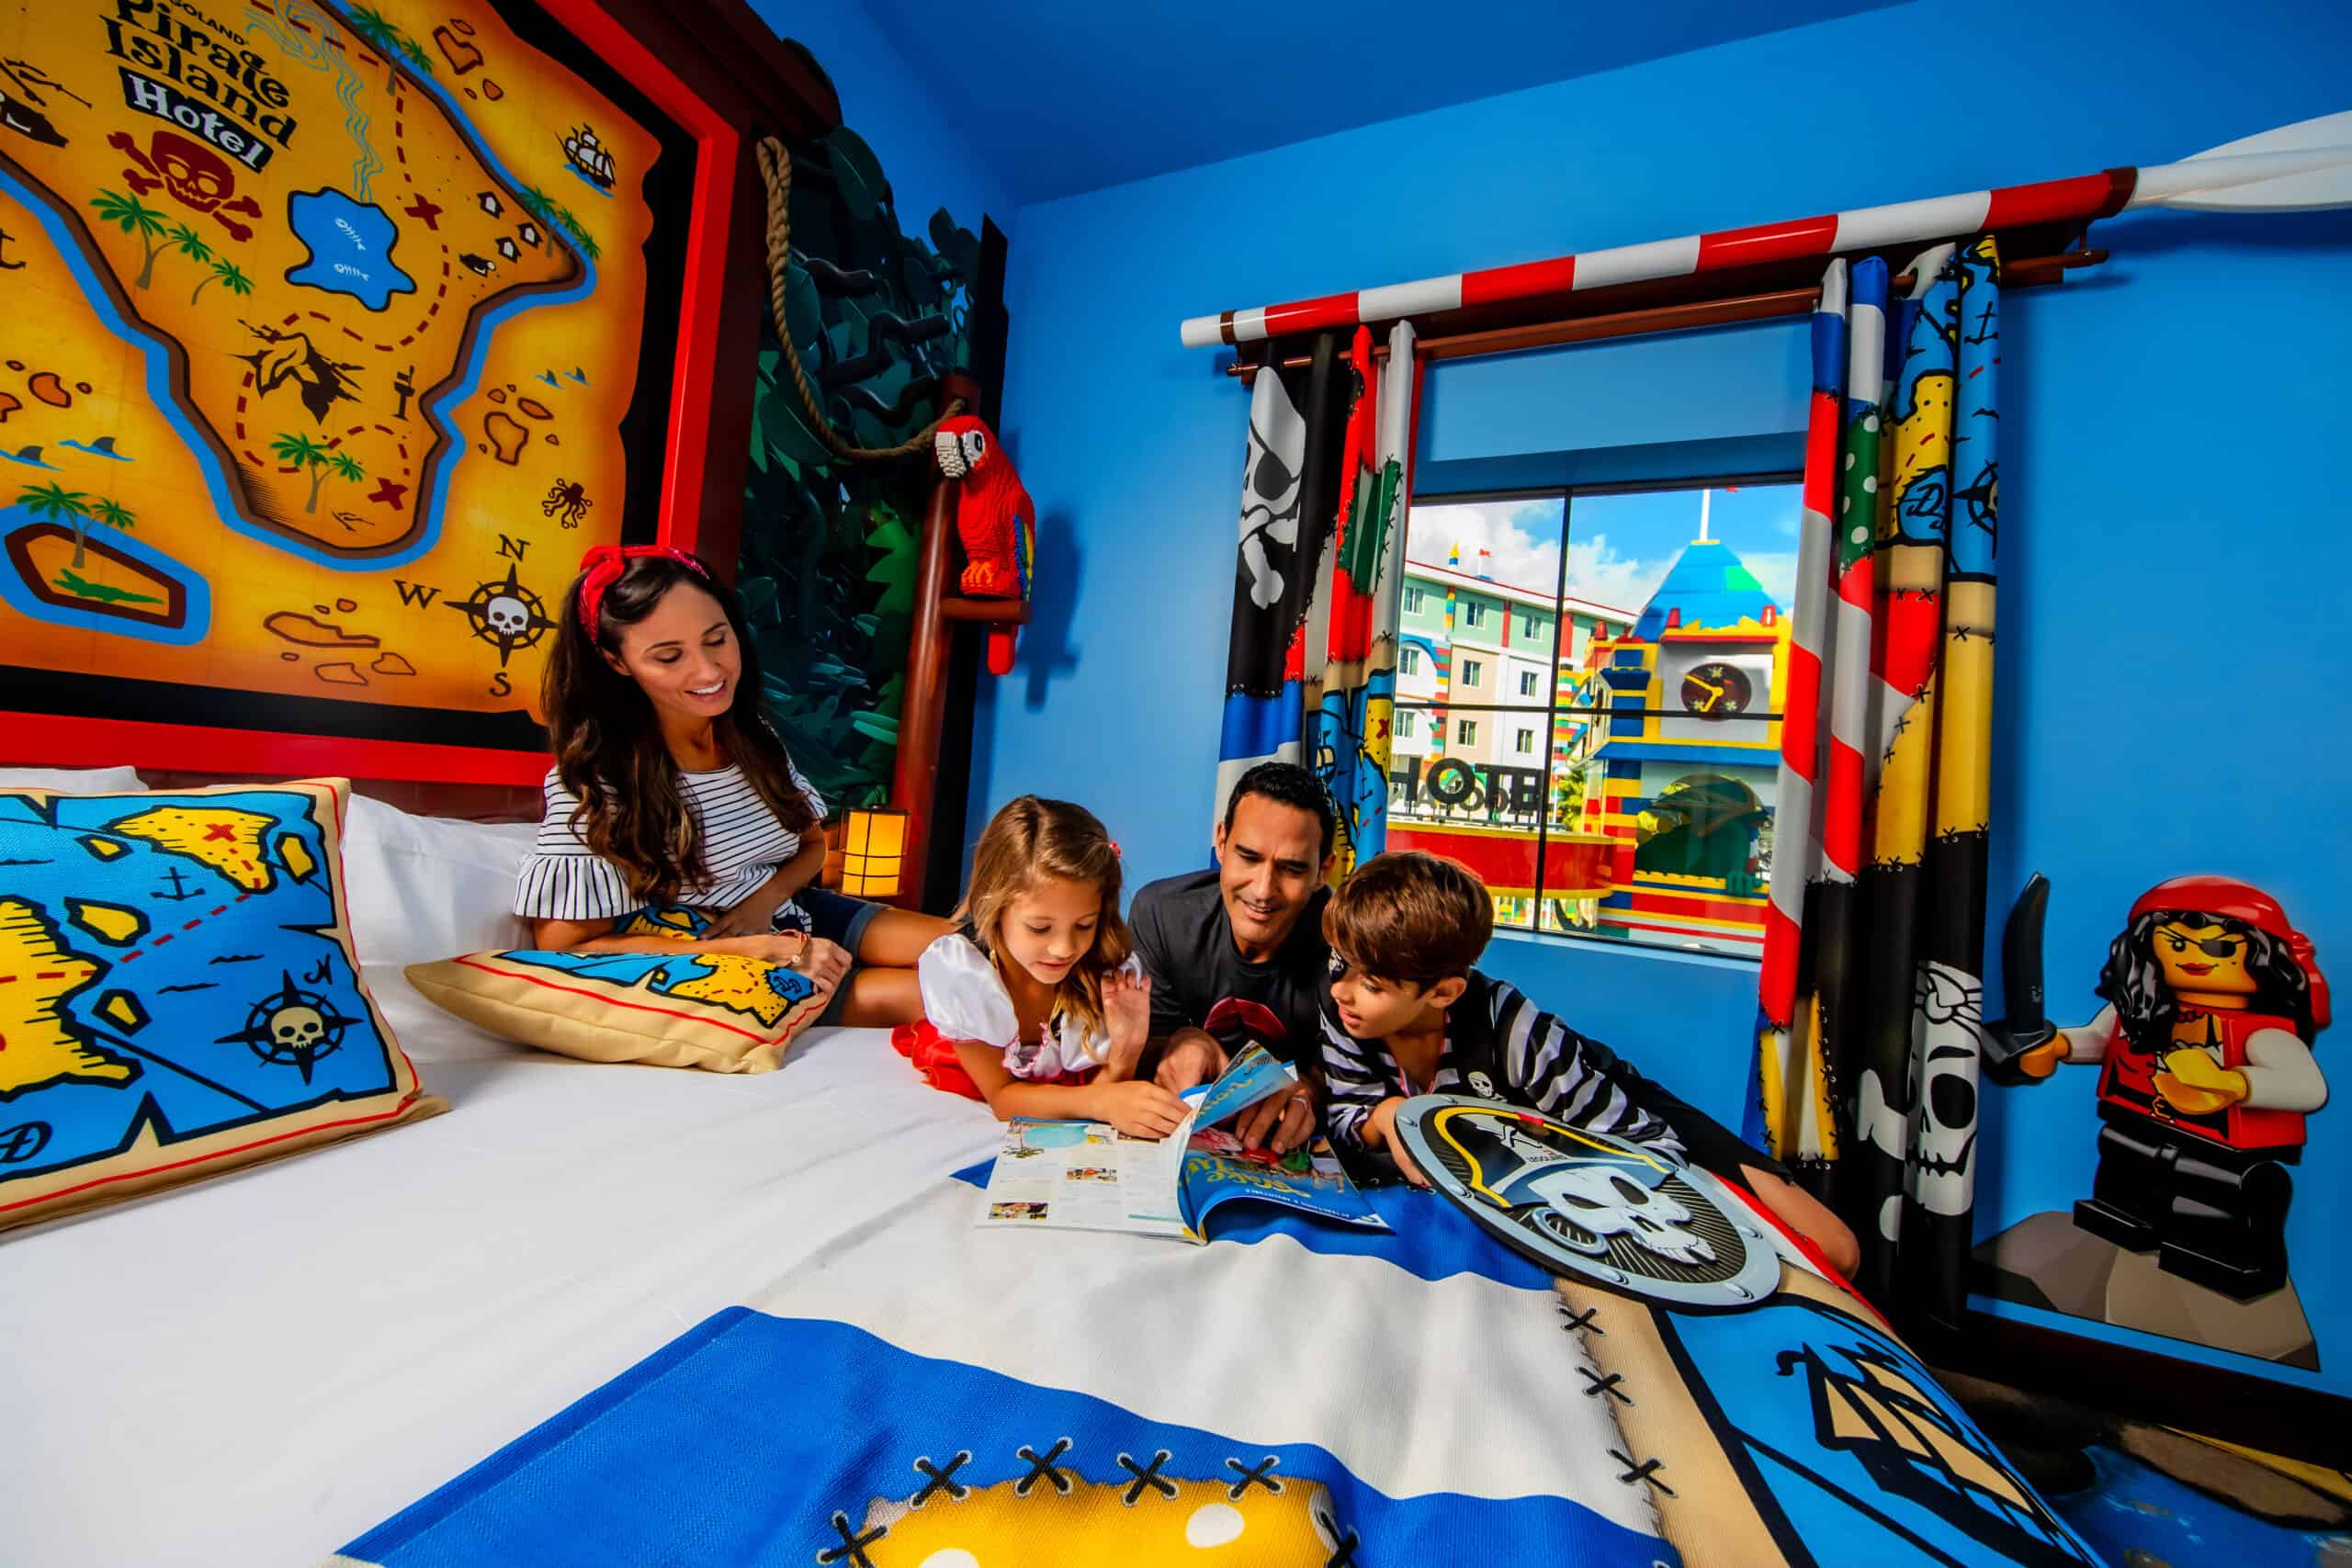 <p>Disney theme parks remain a bucket-list trip for most families around the world, but I don’t think parents would use the word ease to describe it. Legoland Florida offers an all-in-one experience without needing a bus, monorail, gondola, or taxi.</p> <p>“We love staying at the Legoland Hotel. It’s fun, has a great breakfast, and it’s so close to the park, you walk right in,” said Katie Clark of Magical Family Travel Guide. “When you go to Disney, most resorts are far from the park. It is nice to go back and forth with a child who still takes naps so easily.</p>